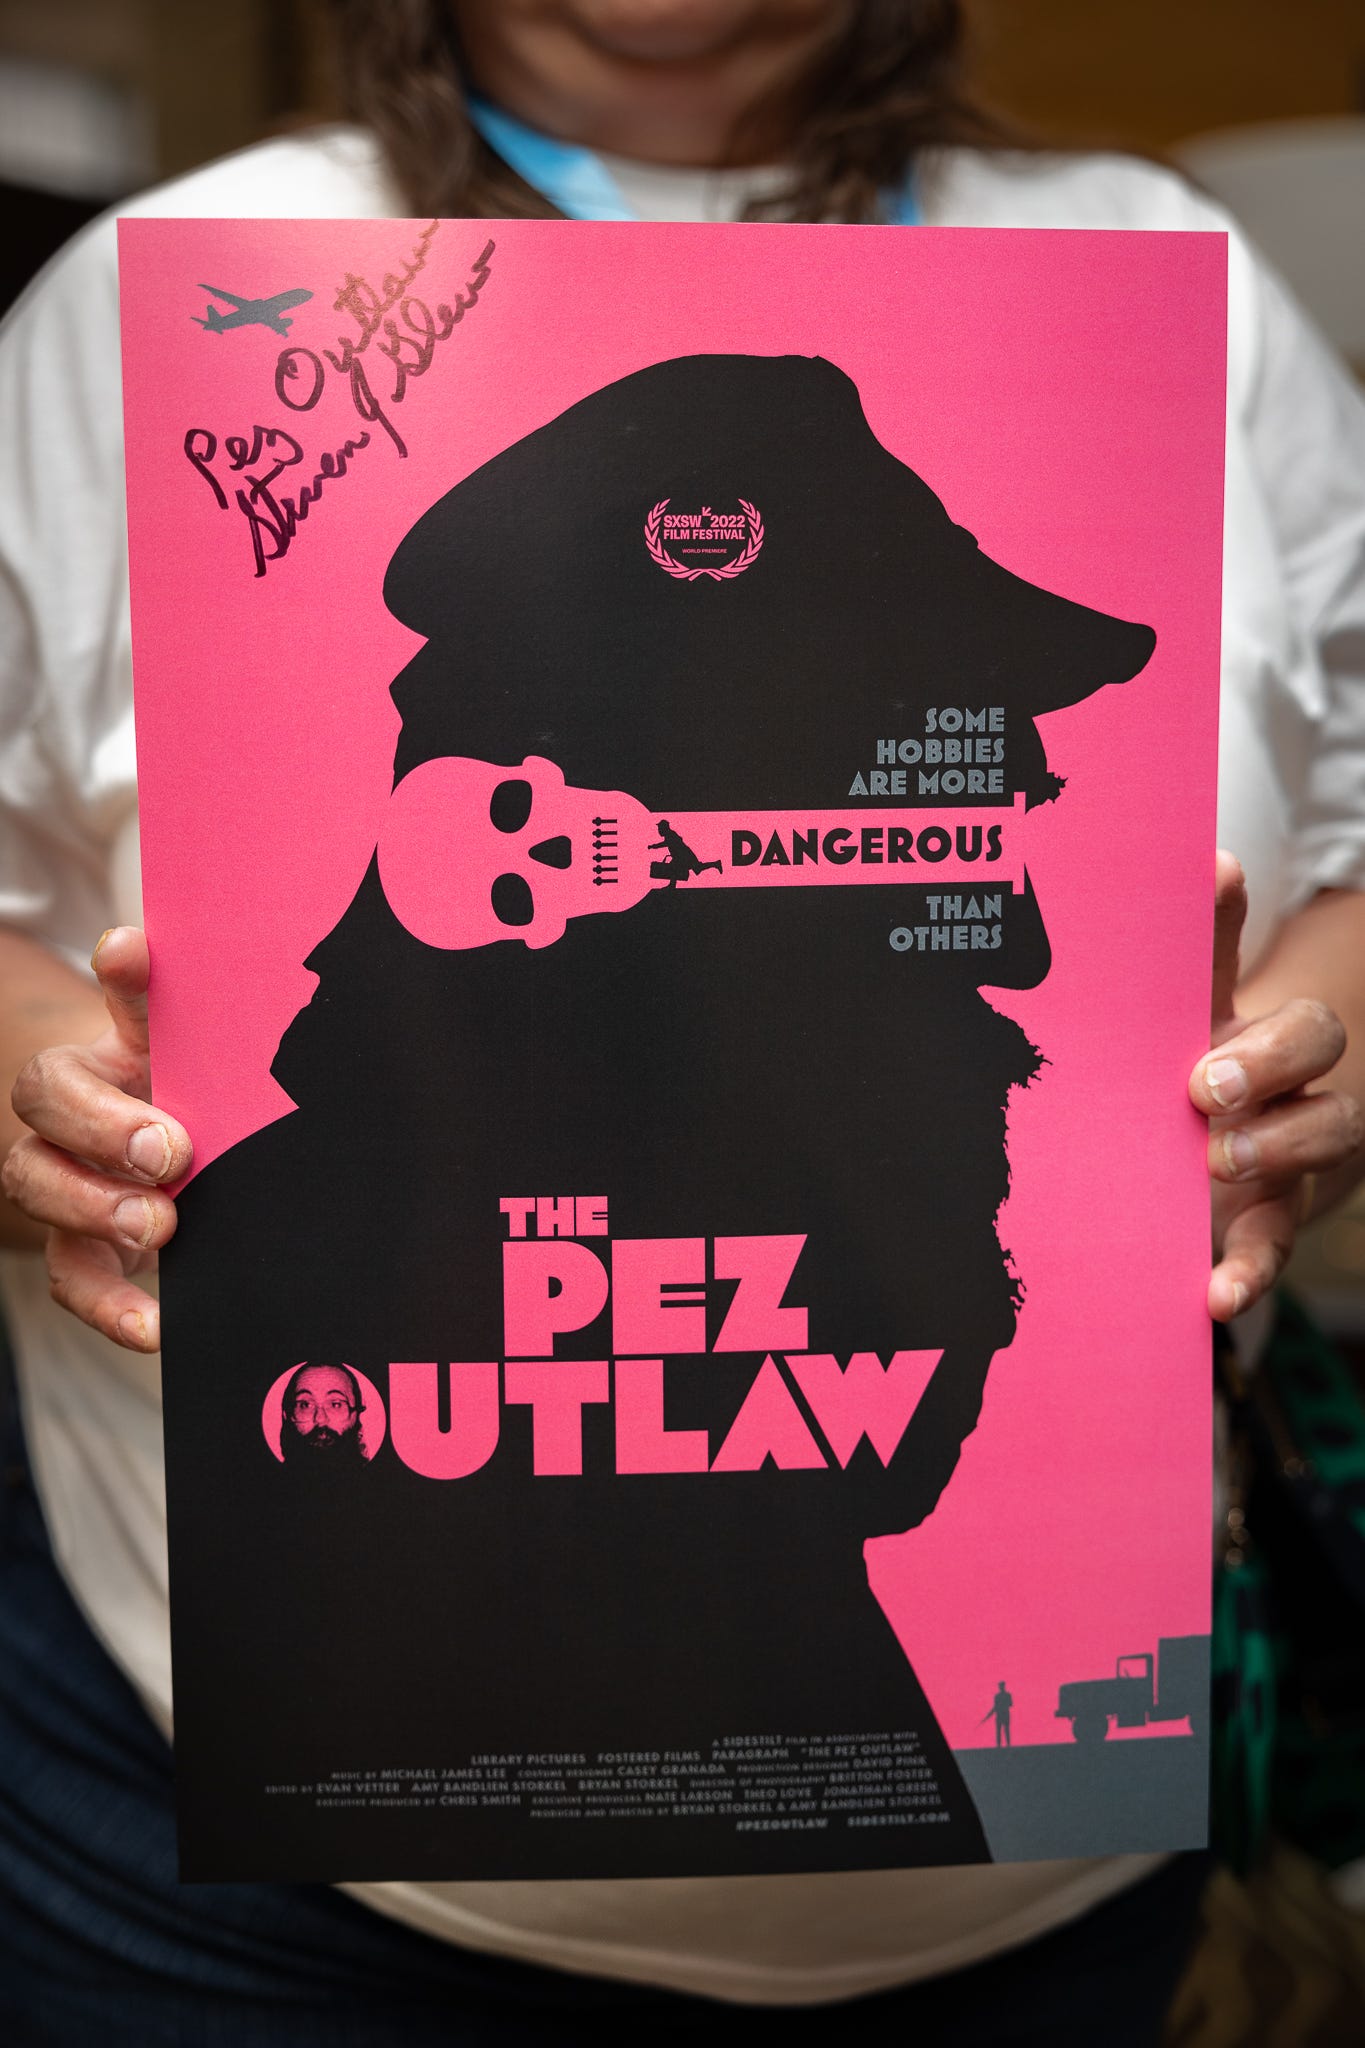 A poster signed by Steve Glew at the Pezamania convention in Independence, Ohio.